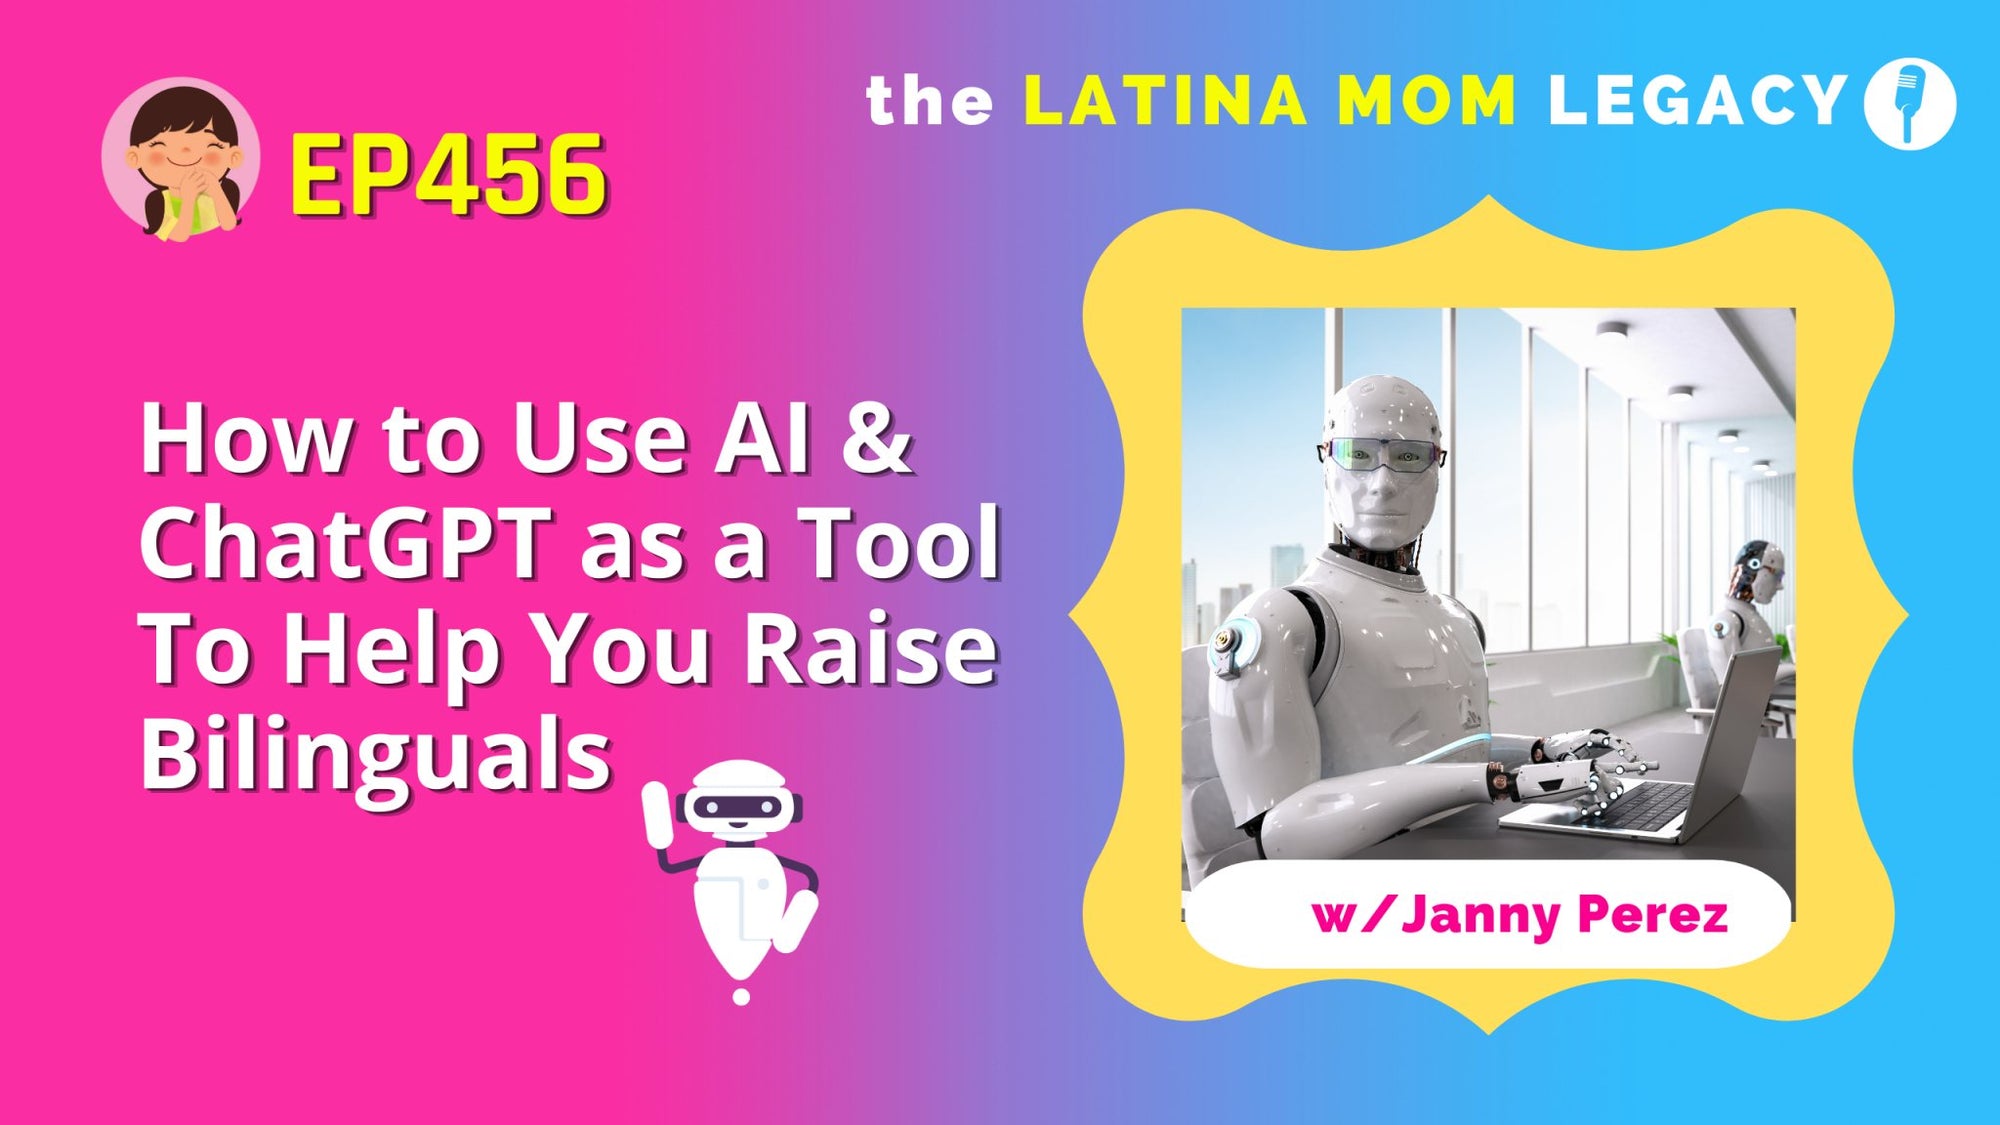 EP 456: HOW TO USE AI AND CHAT GPT AS A TOOL TO HELP YOU RAISE A BILINGUAL CHILD - Mi LegaSi